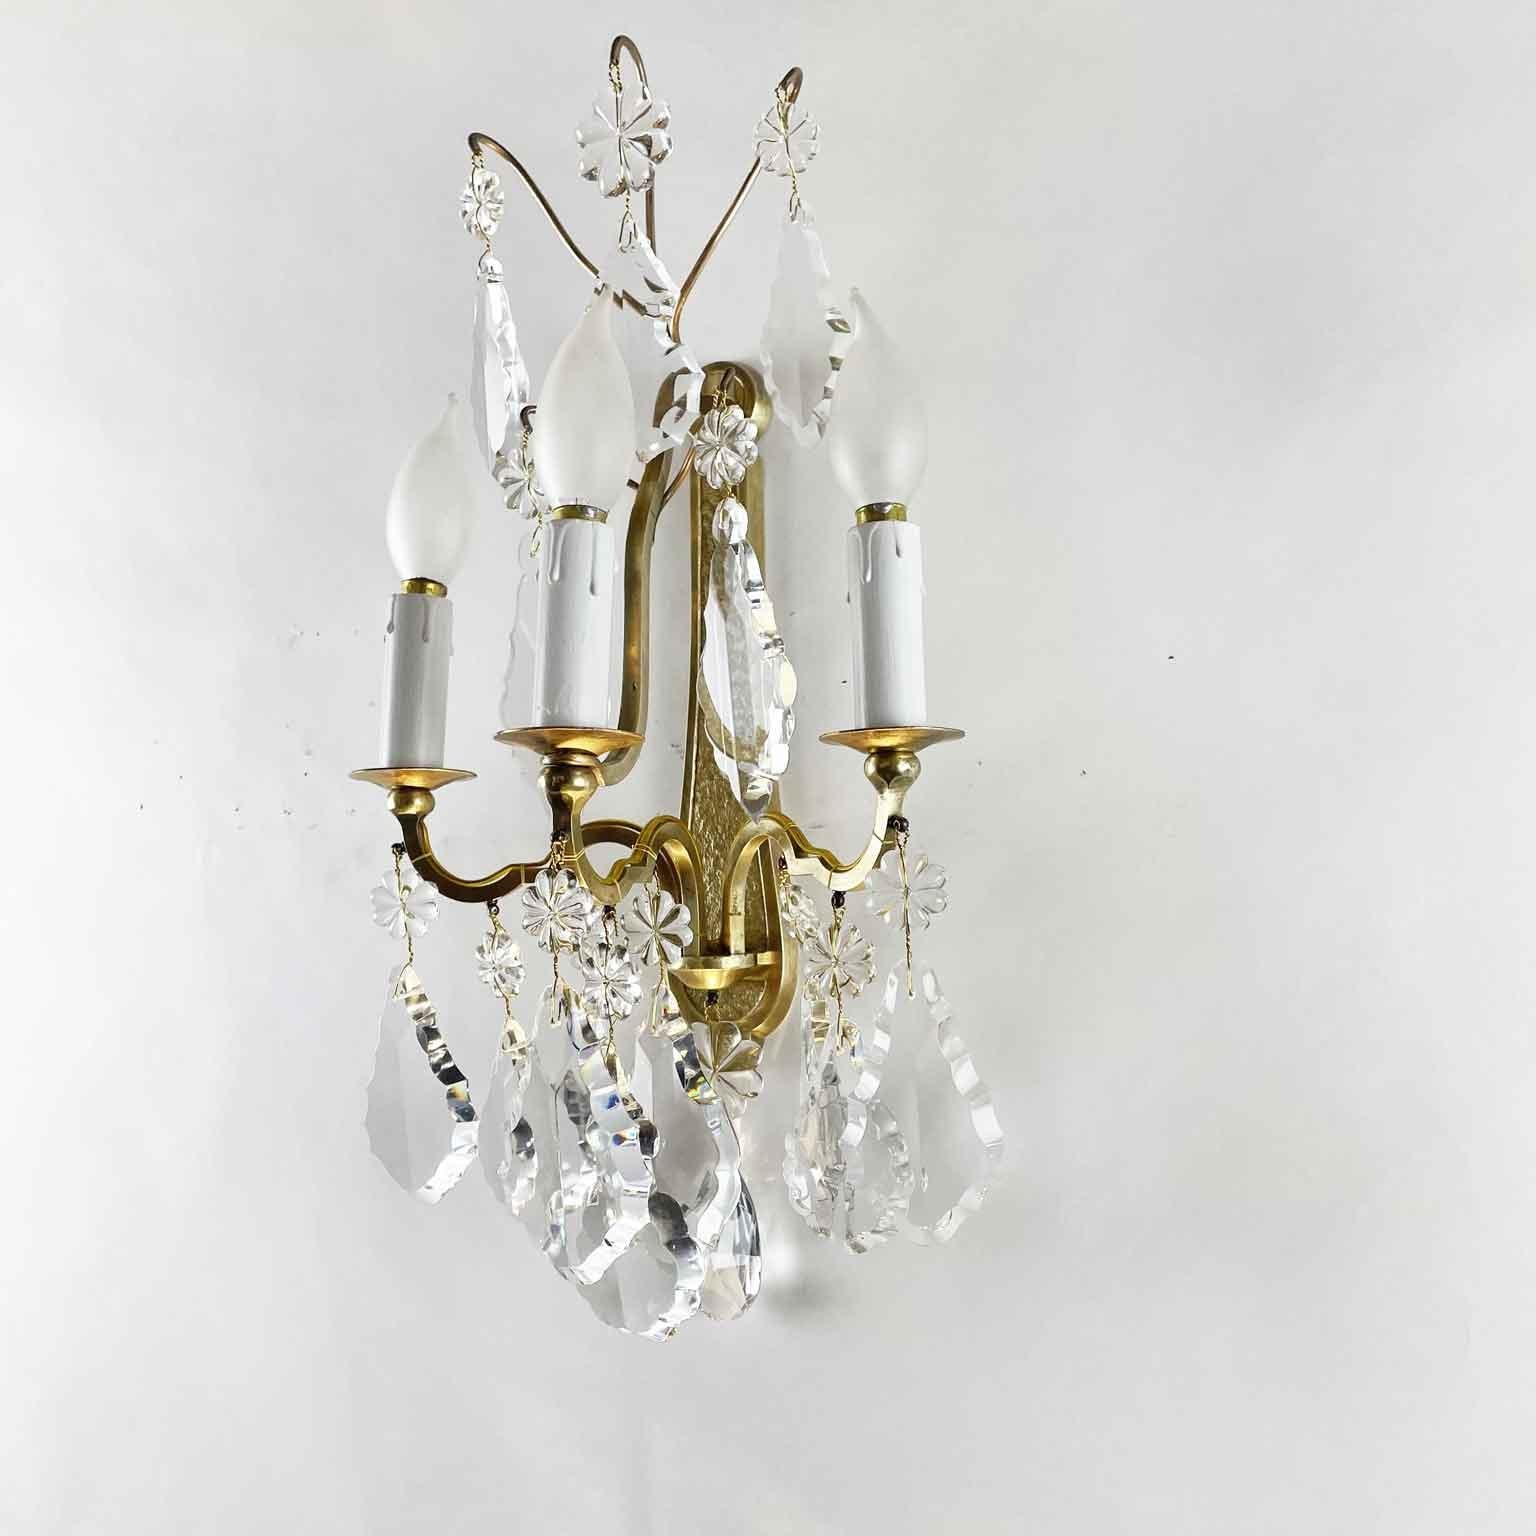 Set of Four Baccarat Crystal Sconces 20th Century French Gilt Wall Lights 7